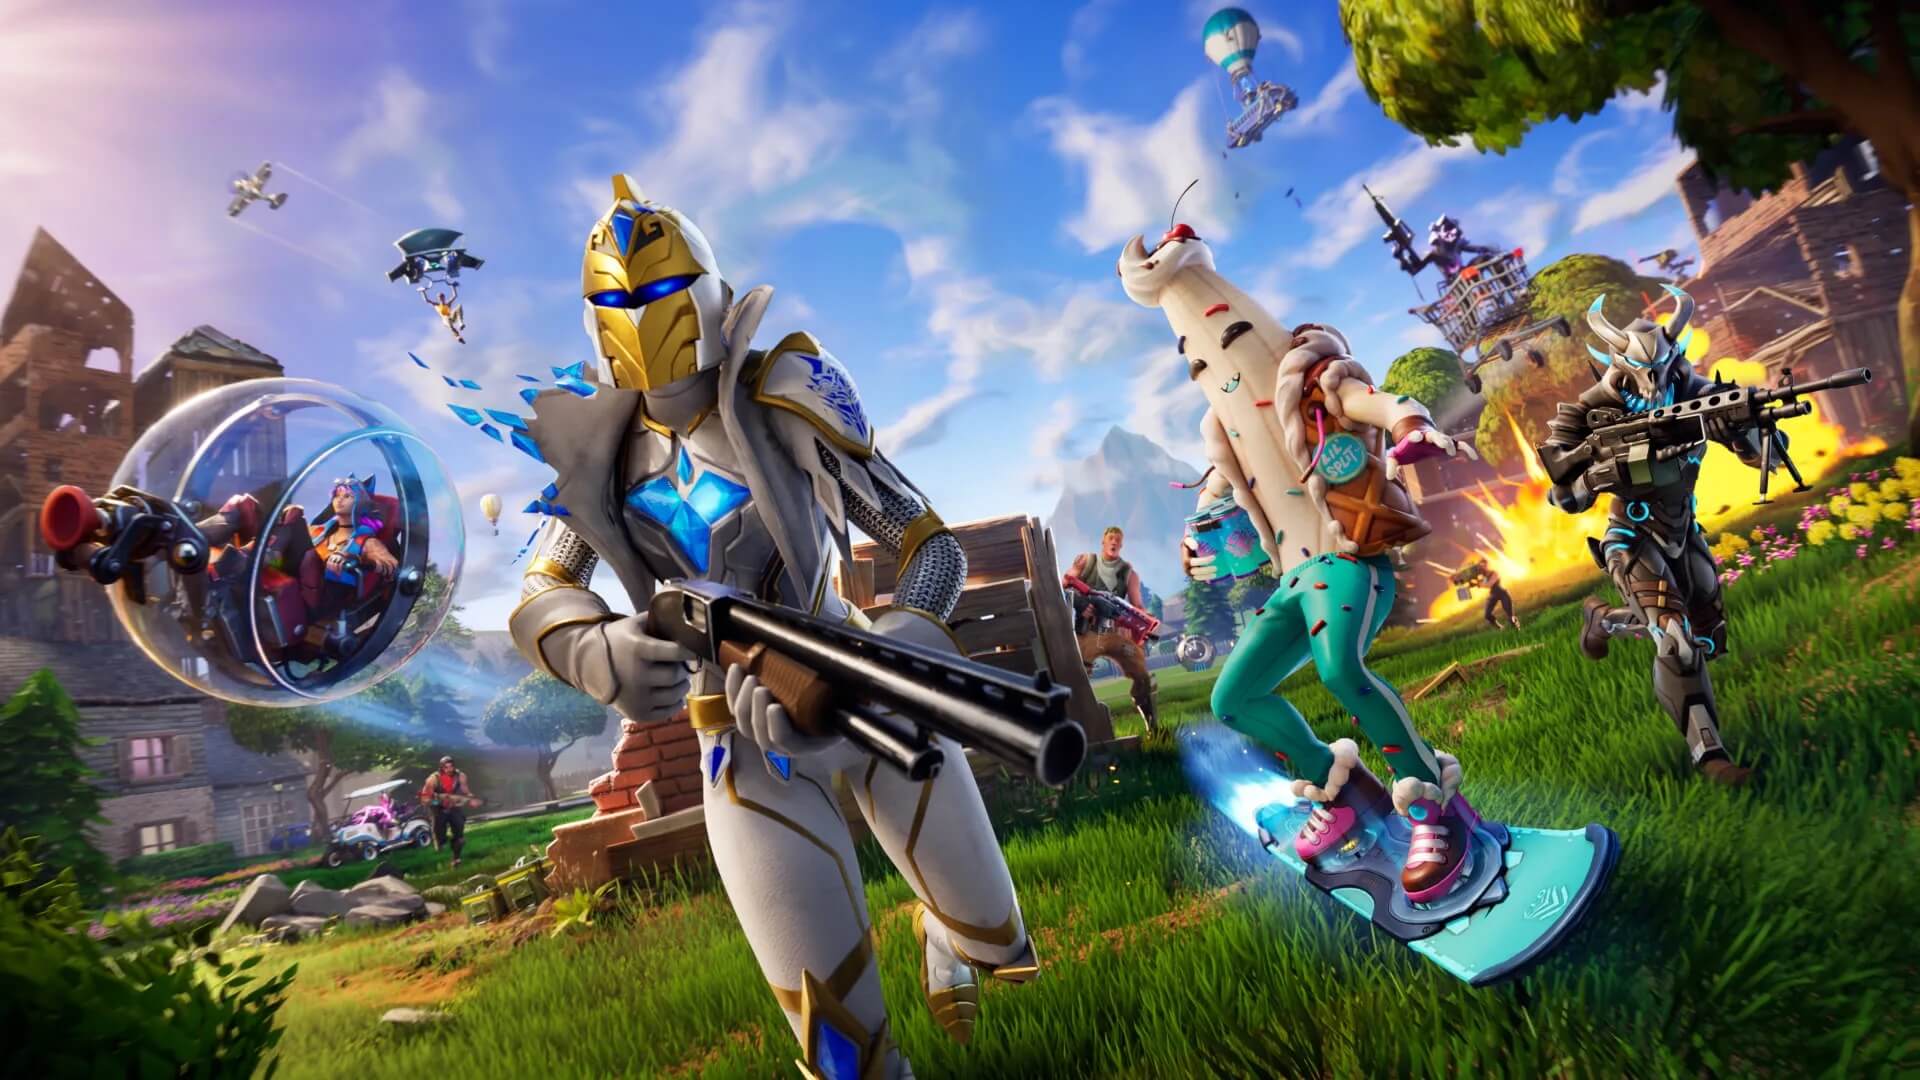 How to download 'Fortnite' on your Windows PC in a few simple